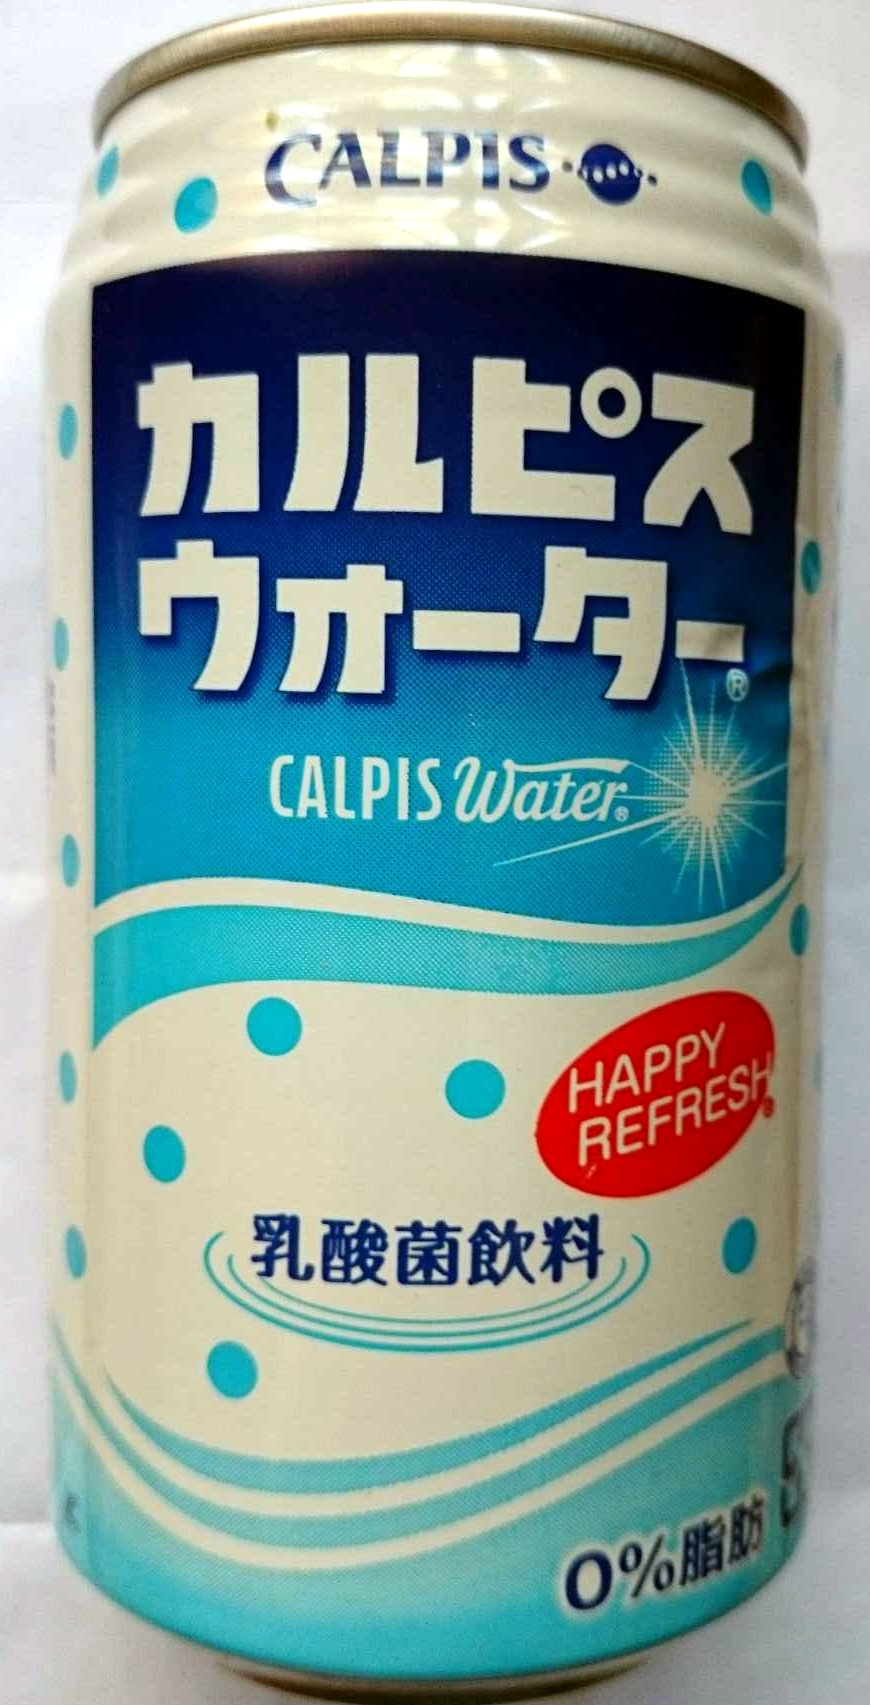 Calpis water - Product